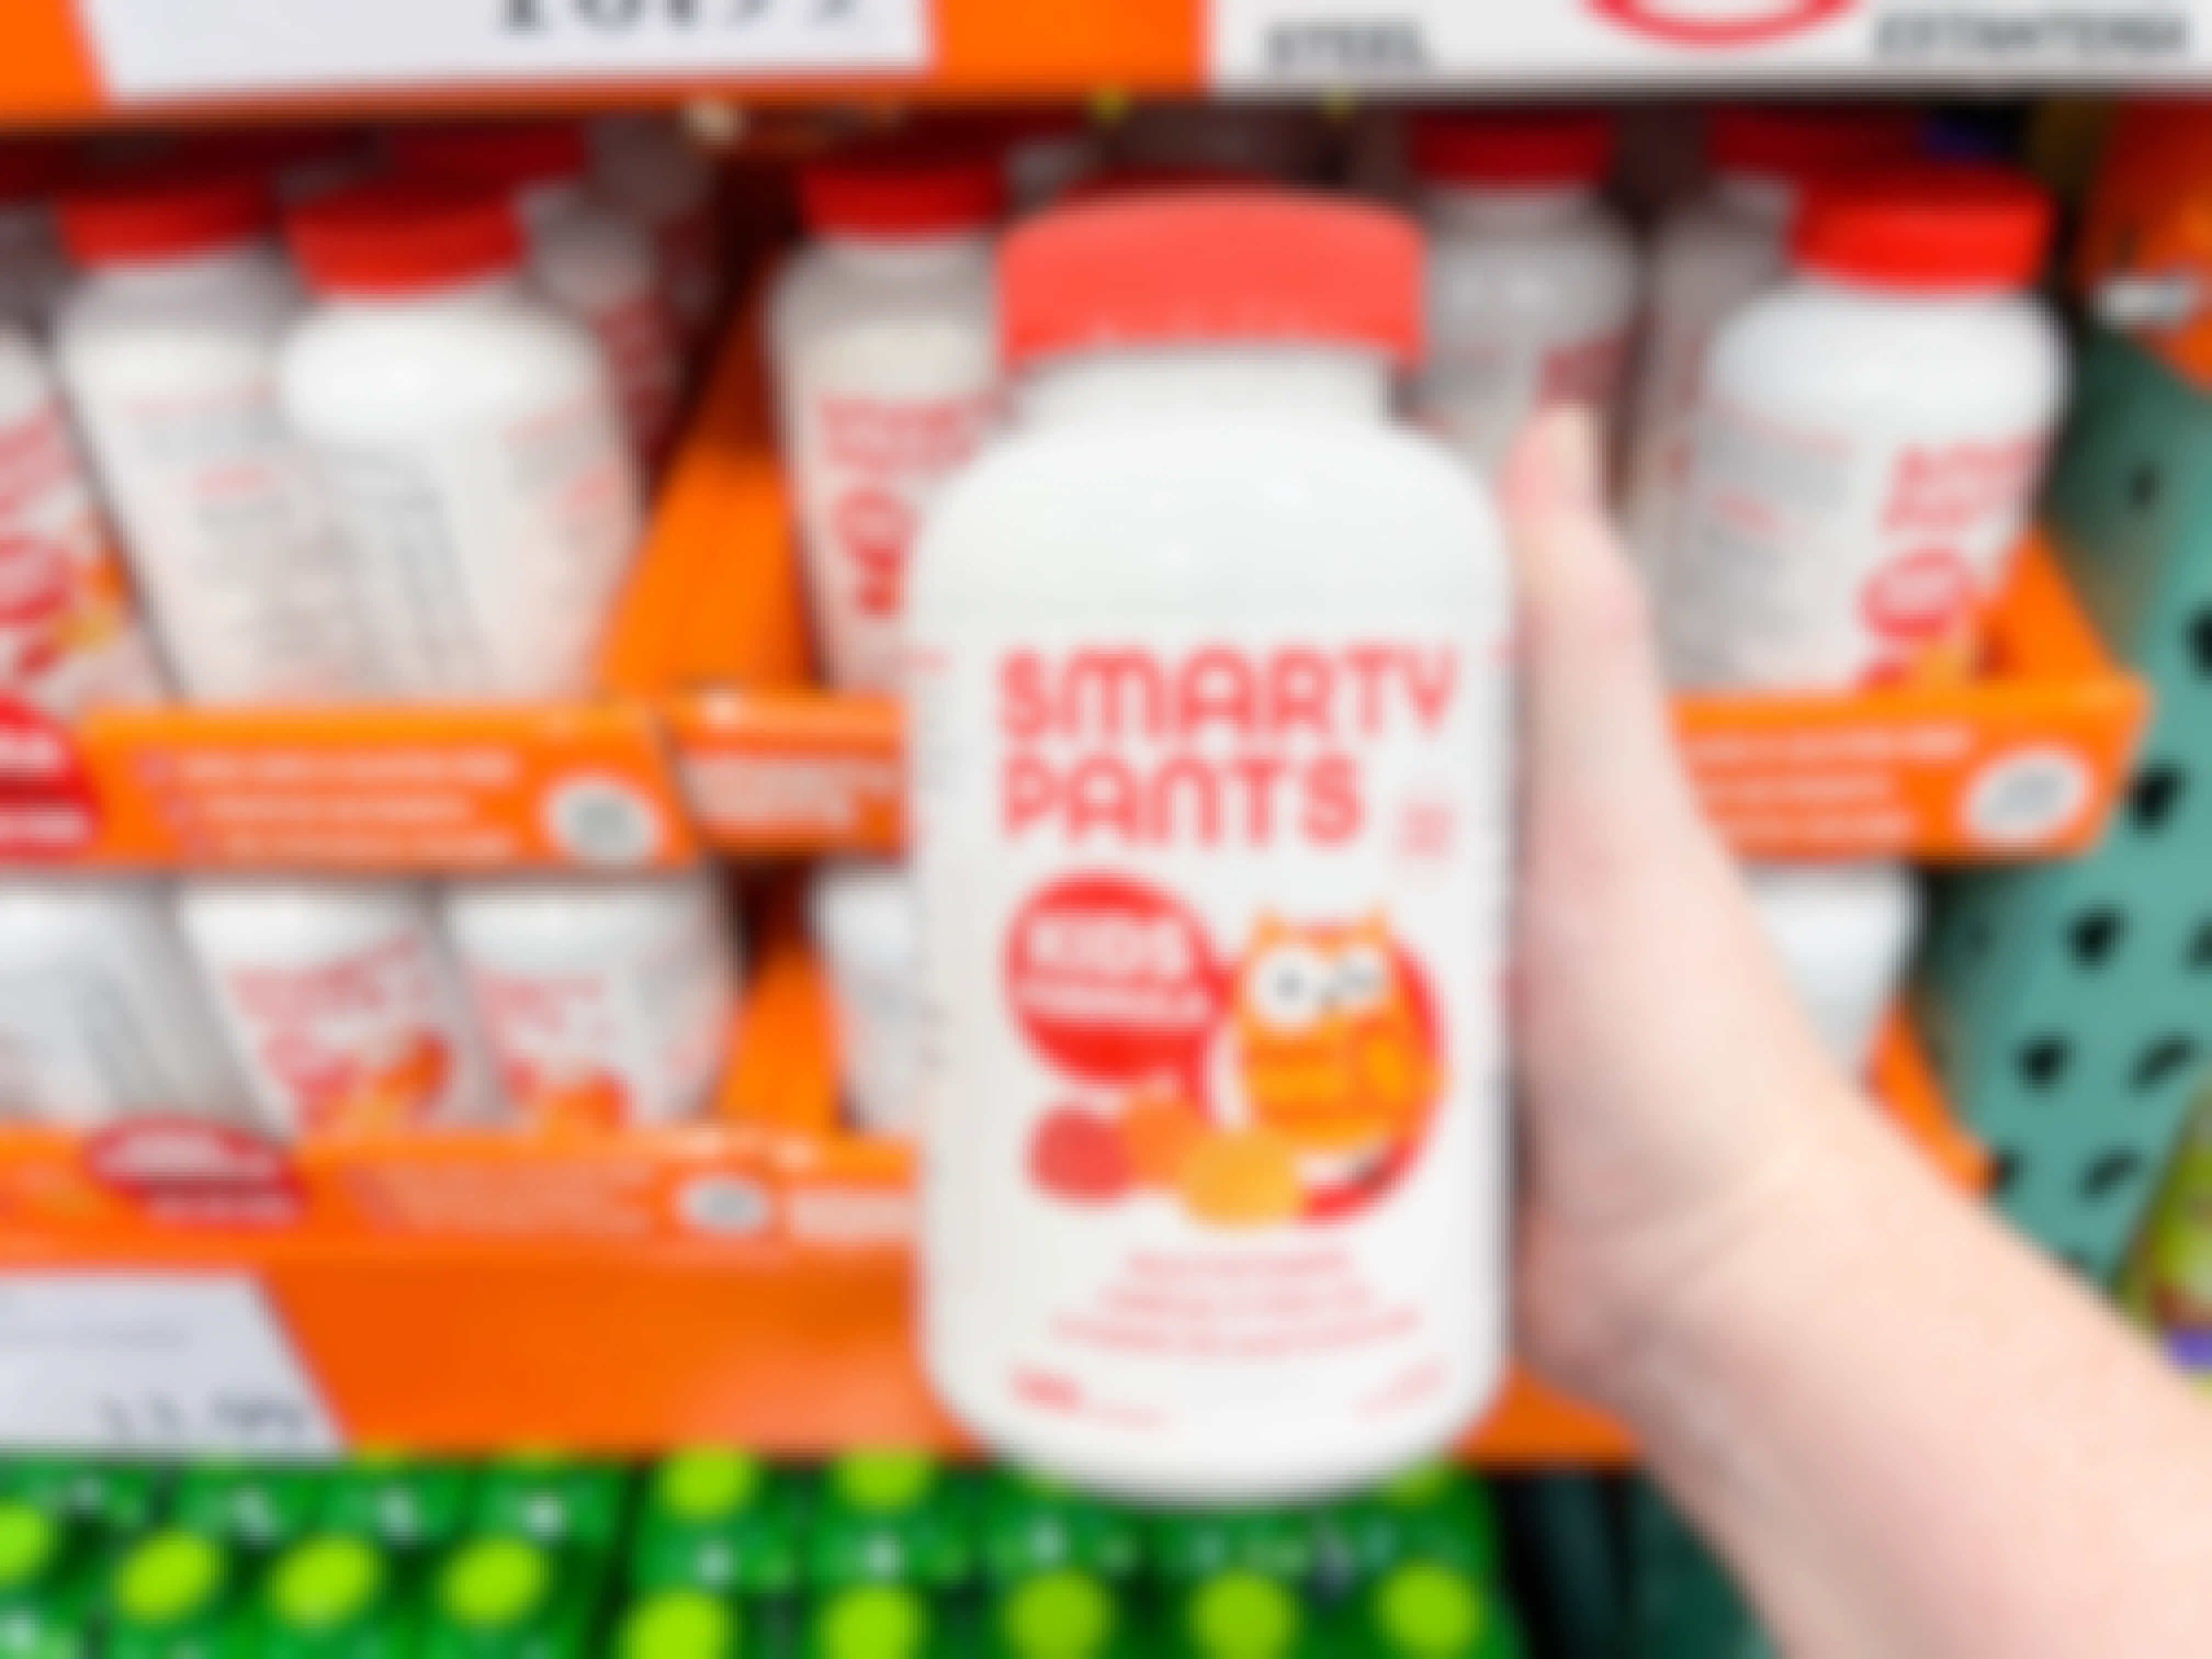 a bottle of smarty pants vitamins being held in store